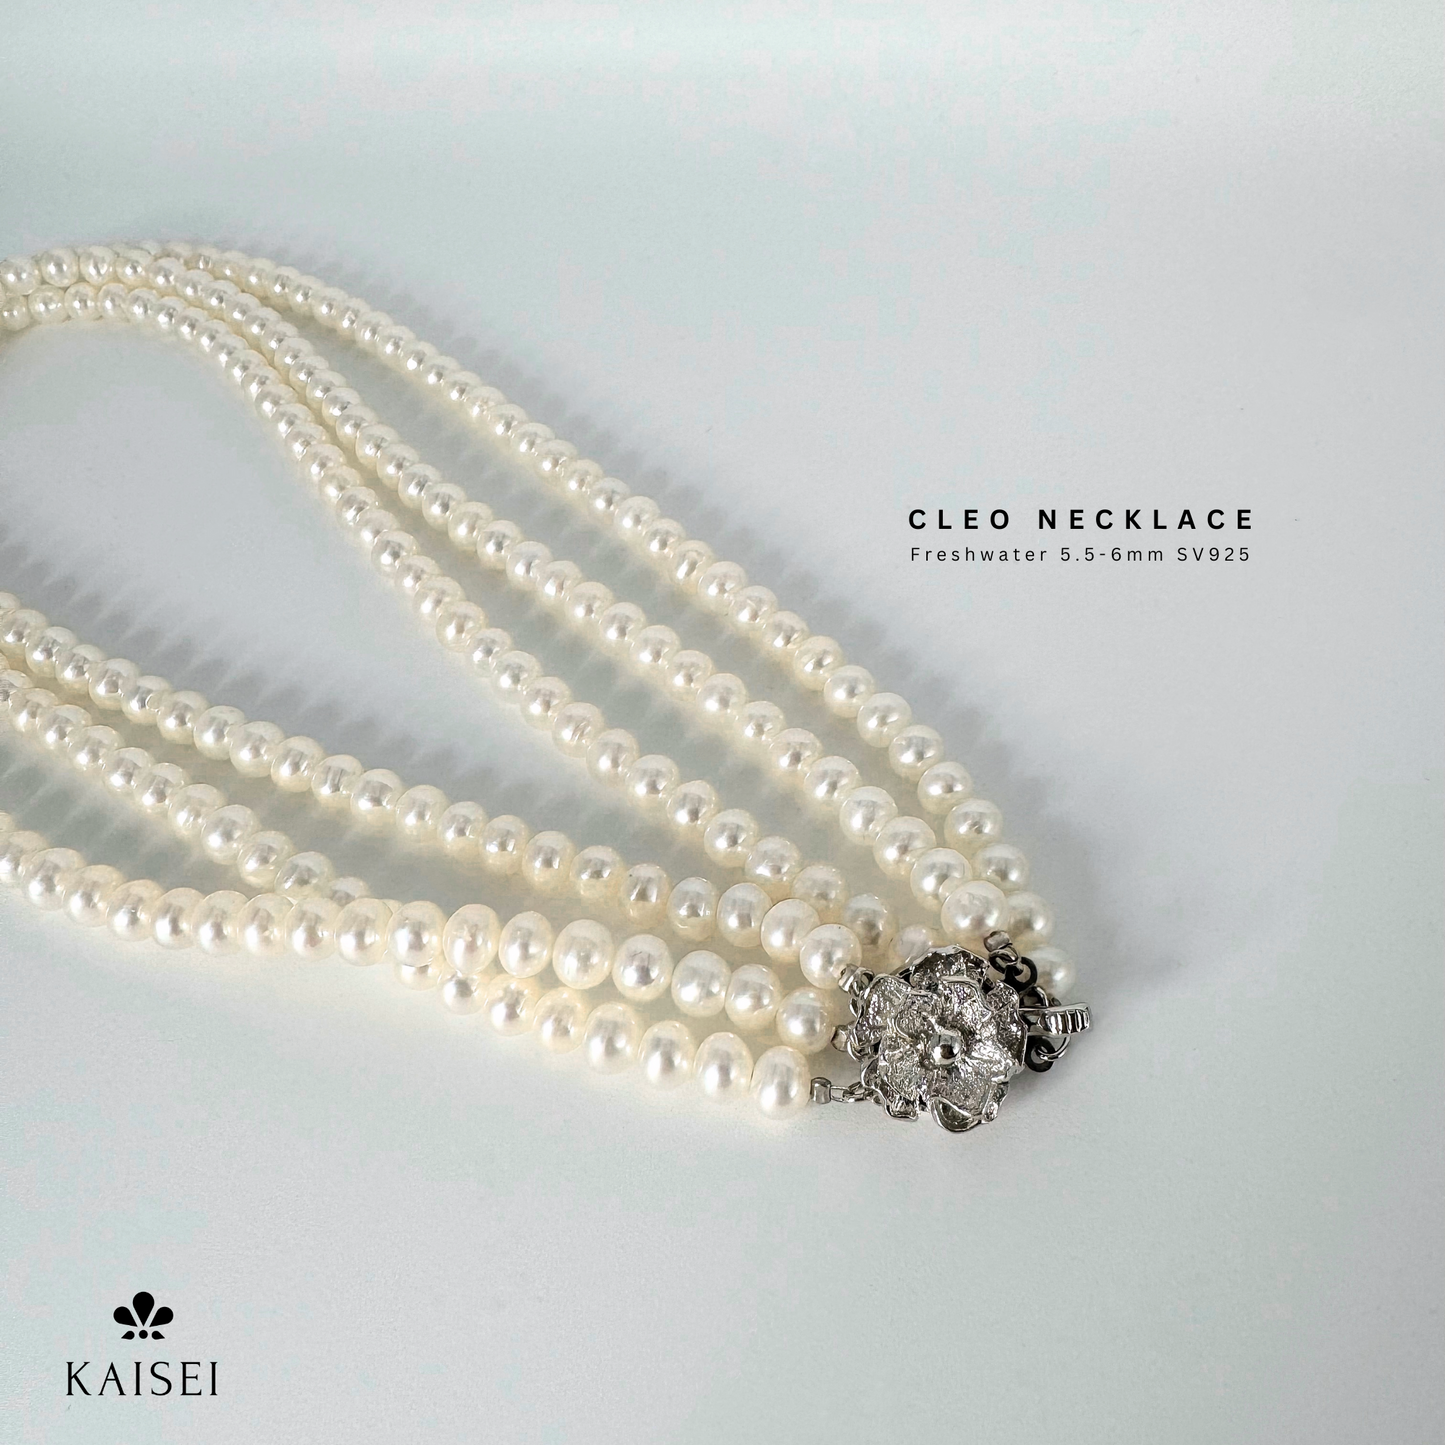 Kaisei Pearl - Cleo Necklace Freshwater Pearl 5.5-6mm 39cm SV925